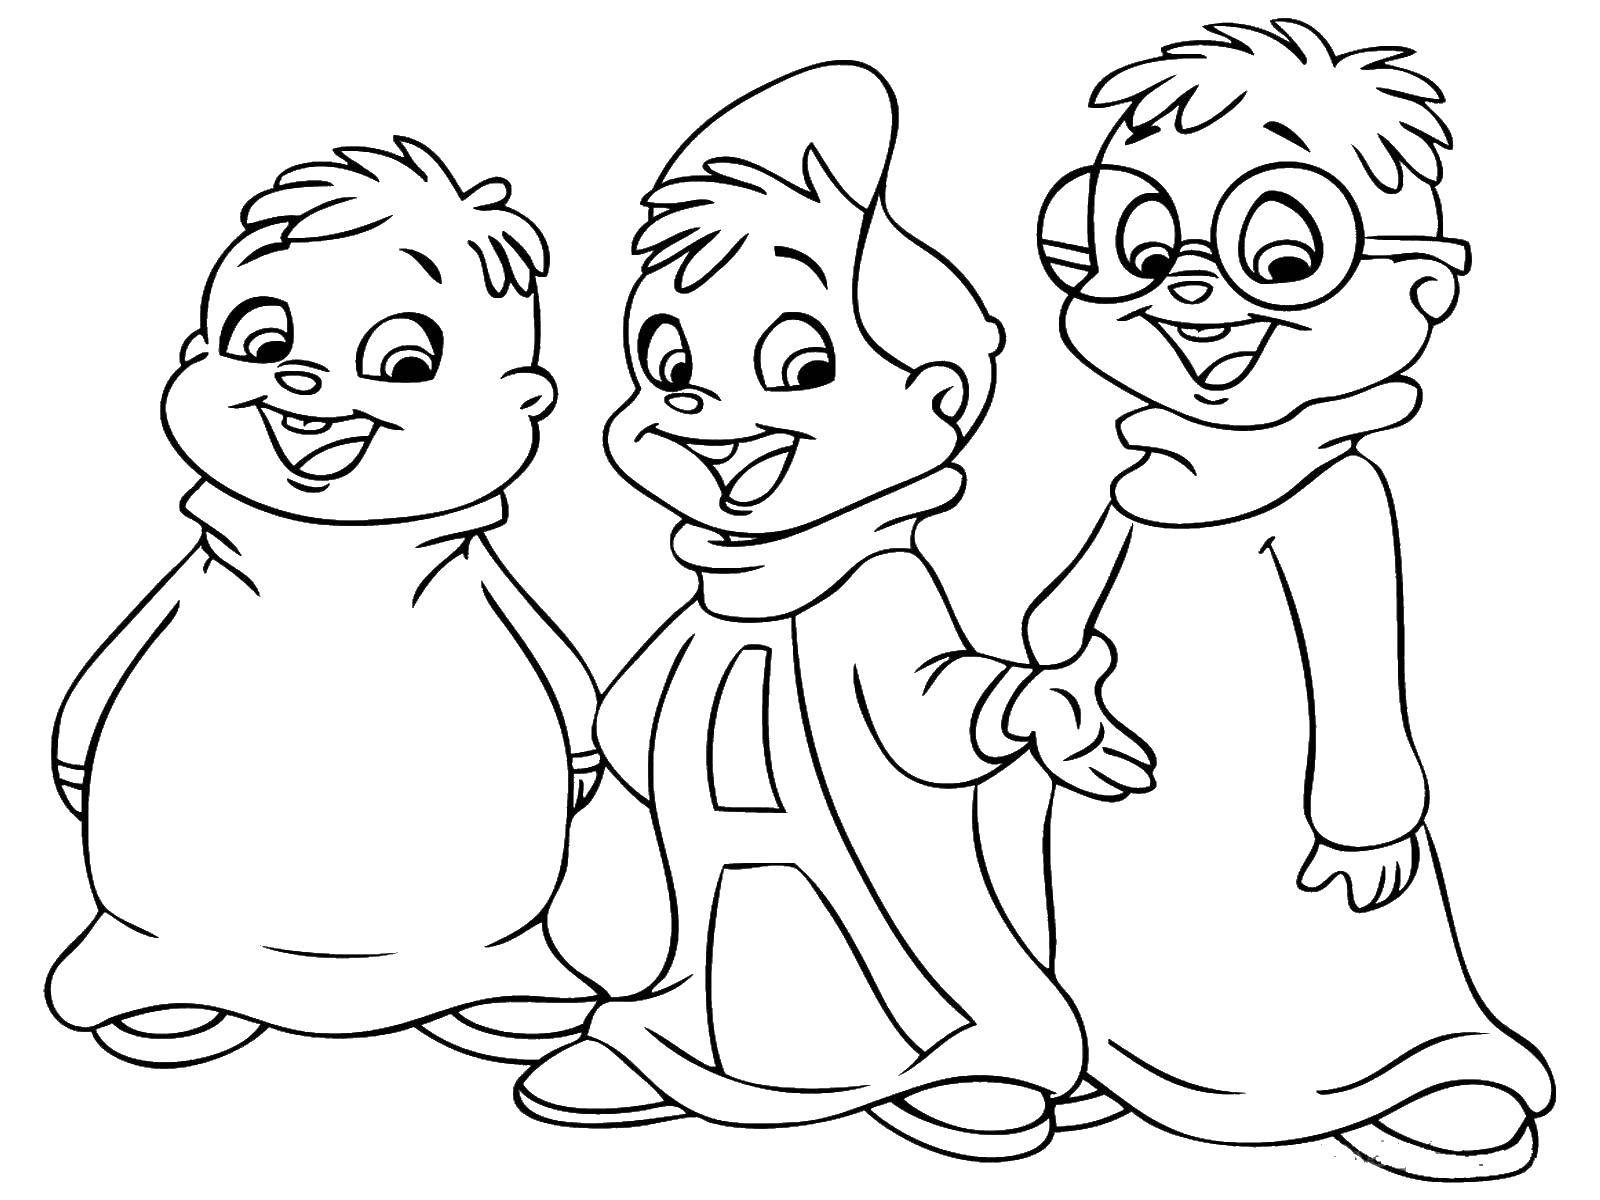 Coloring The three heroes. Category cartoons. Tags:  cartoons characters.